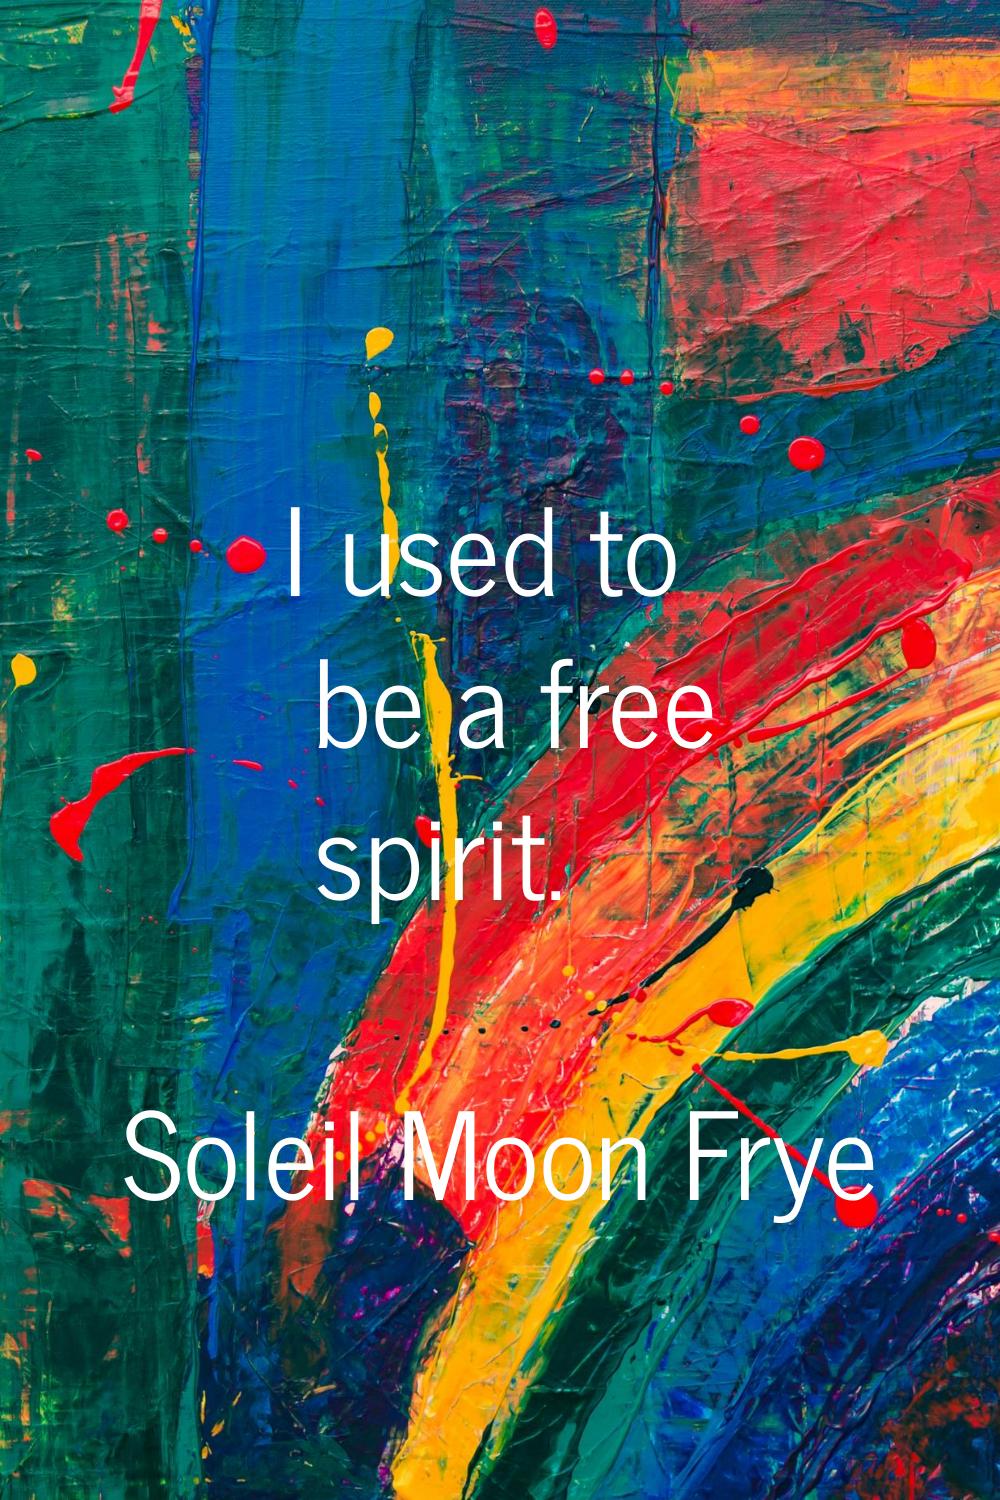 I used to be a free spirit.